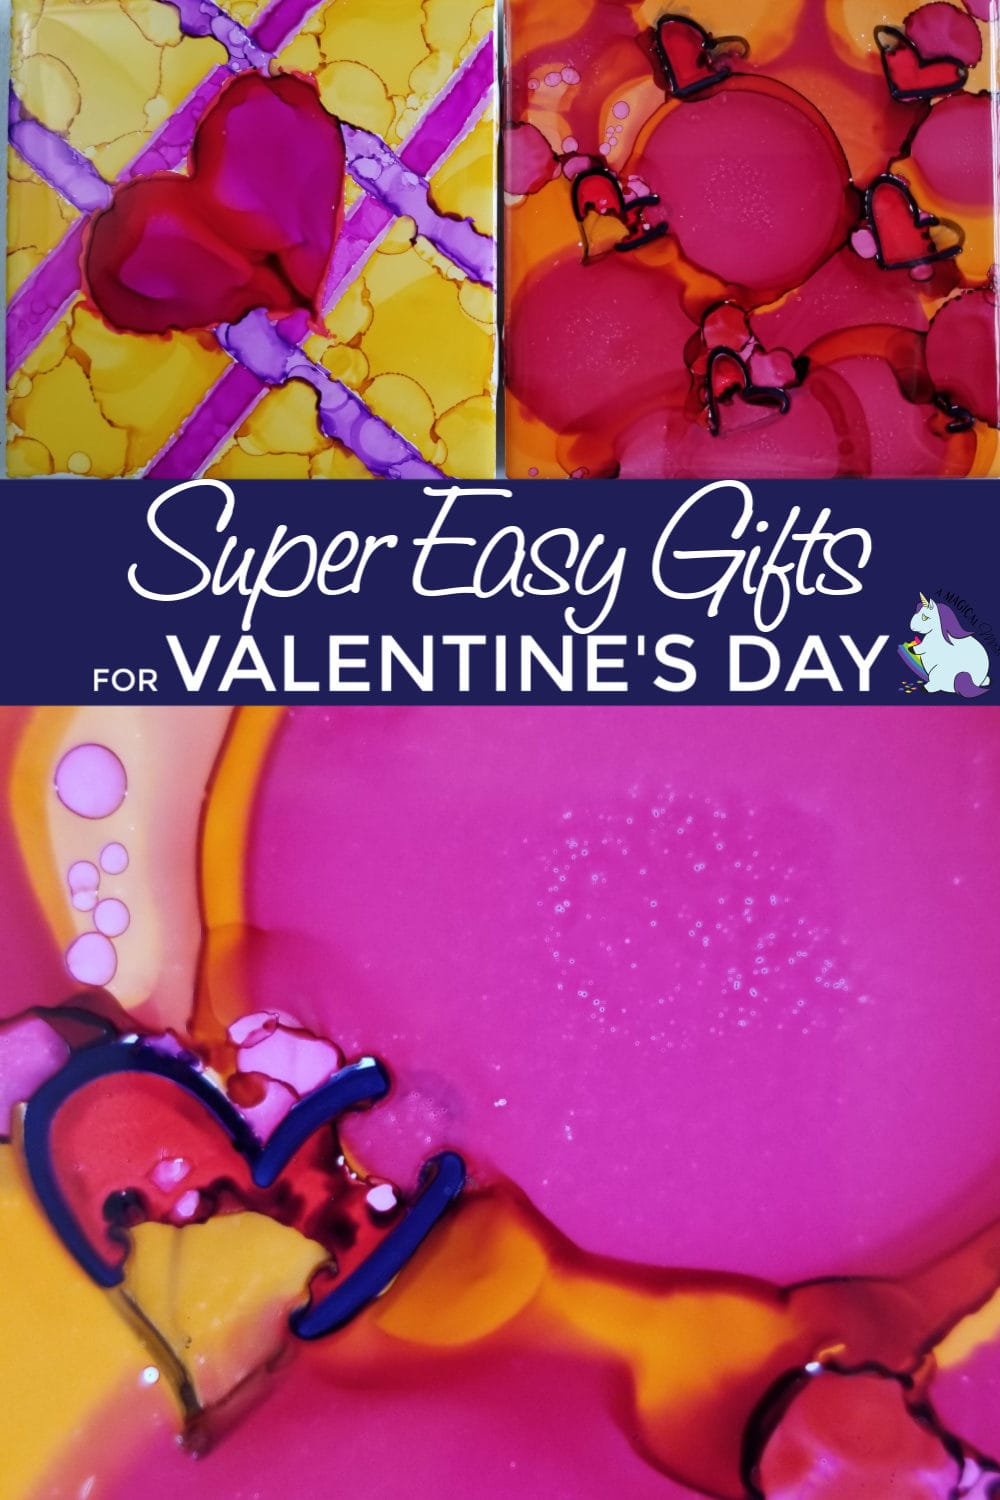 Super easy gifts for Valentine's Day